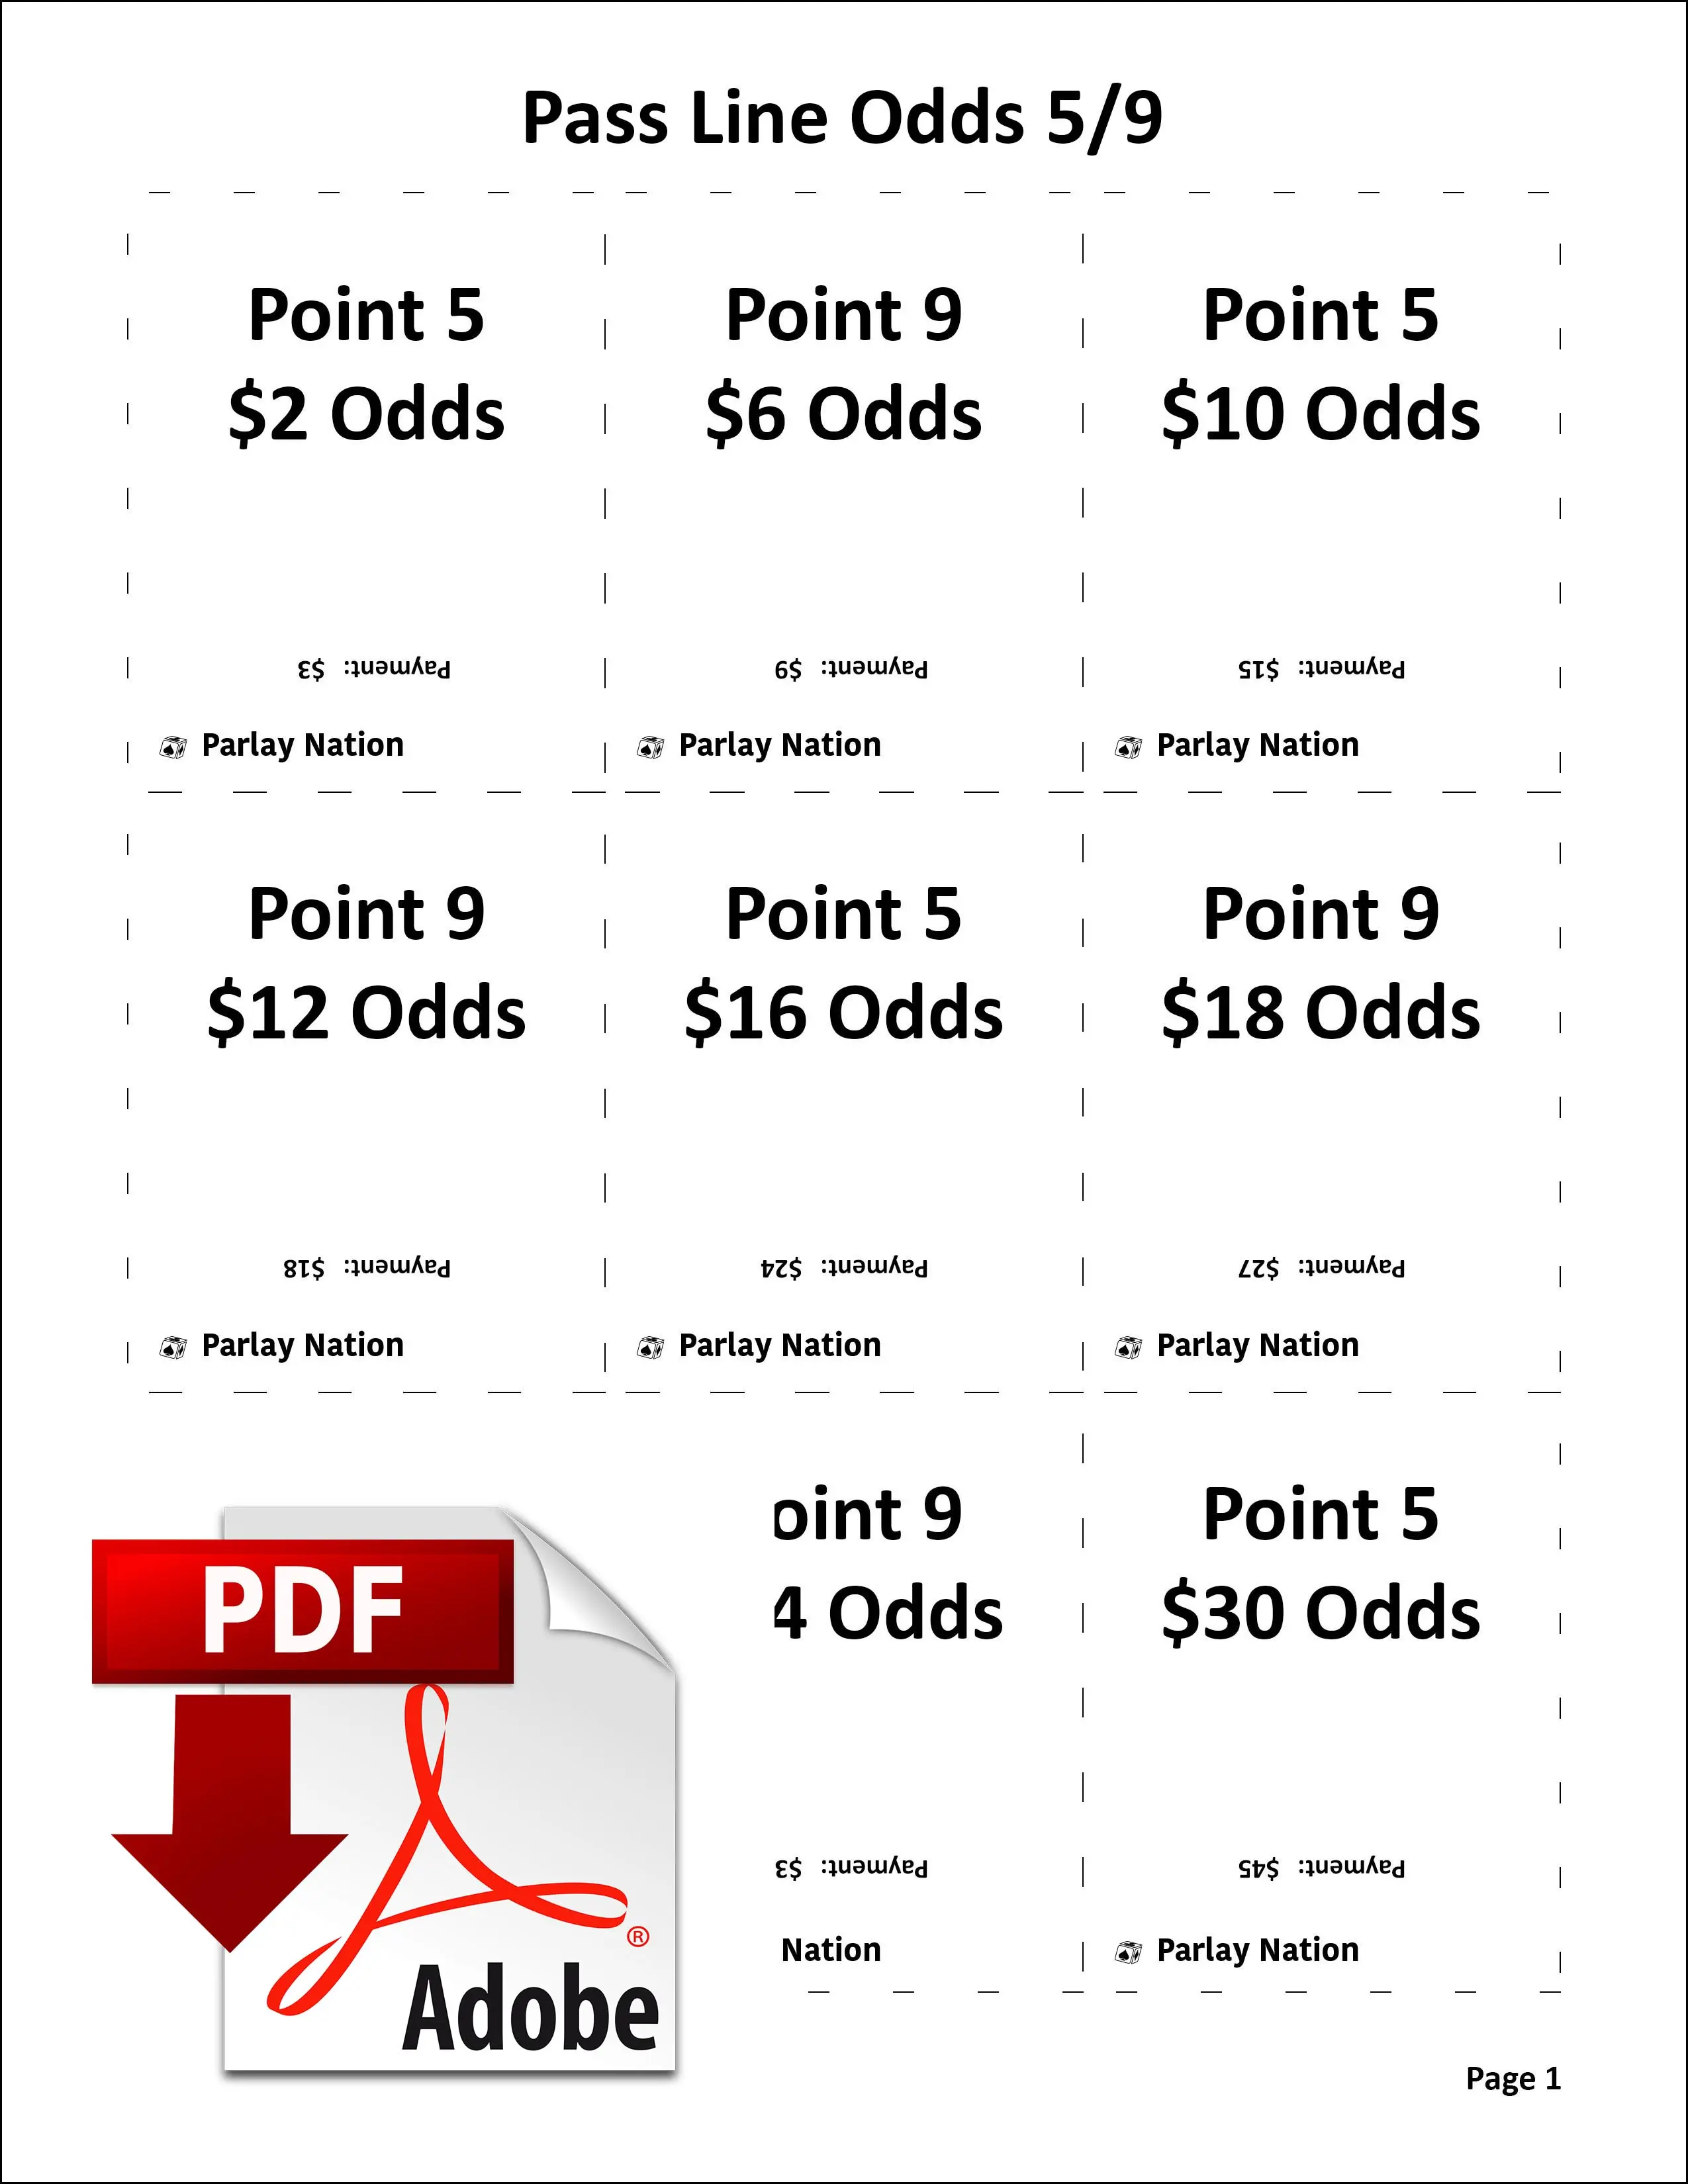 Pass Line Odds Payments 5 & 9 cover sheet.